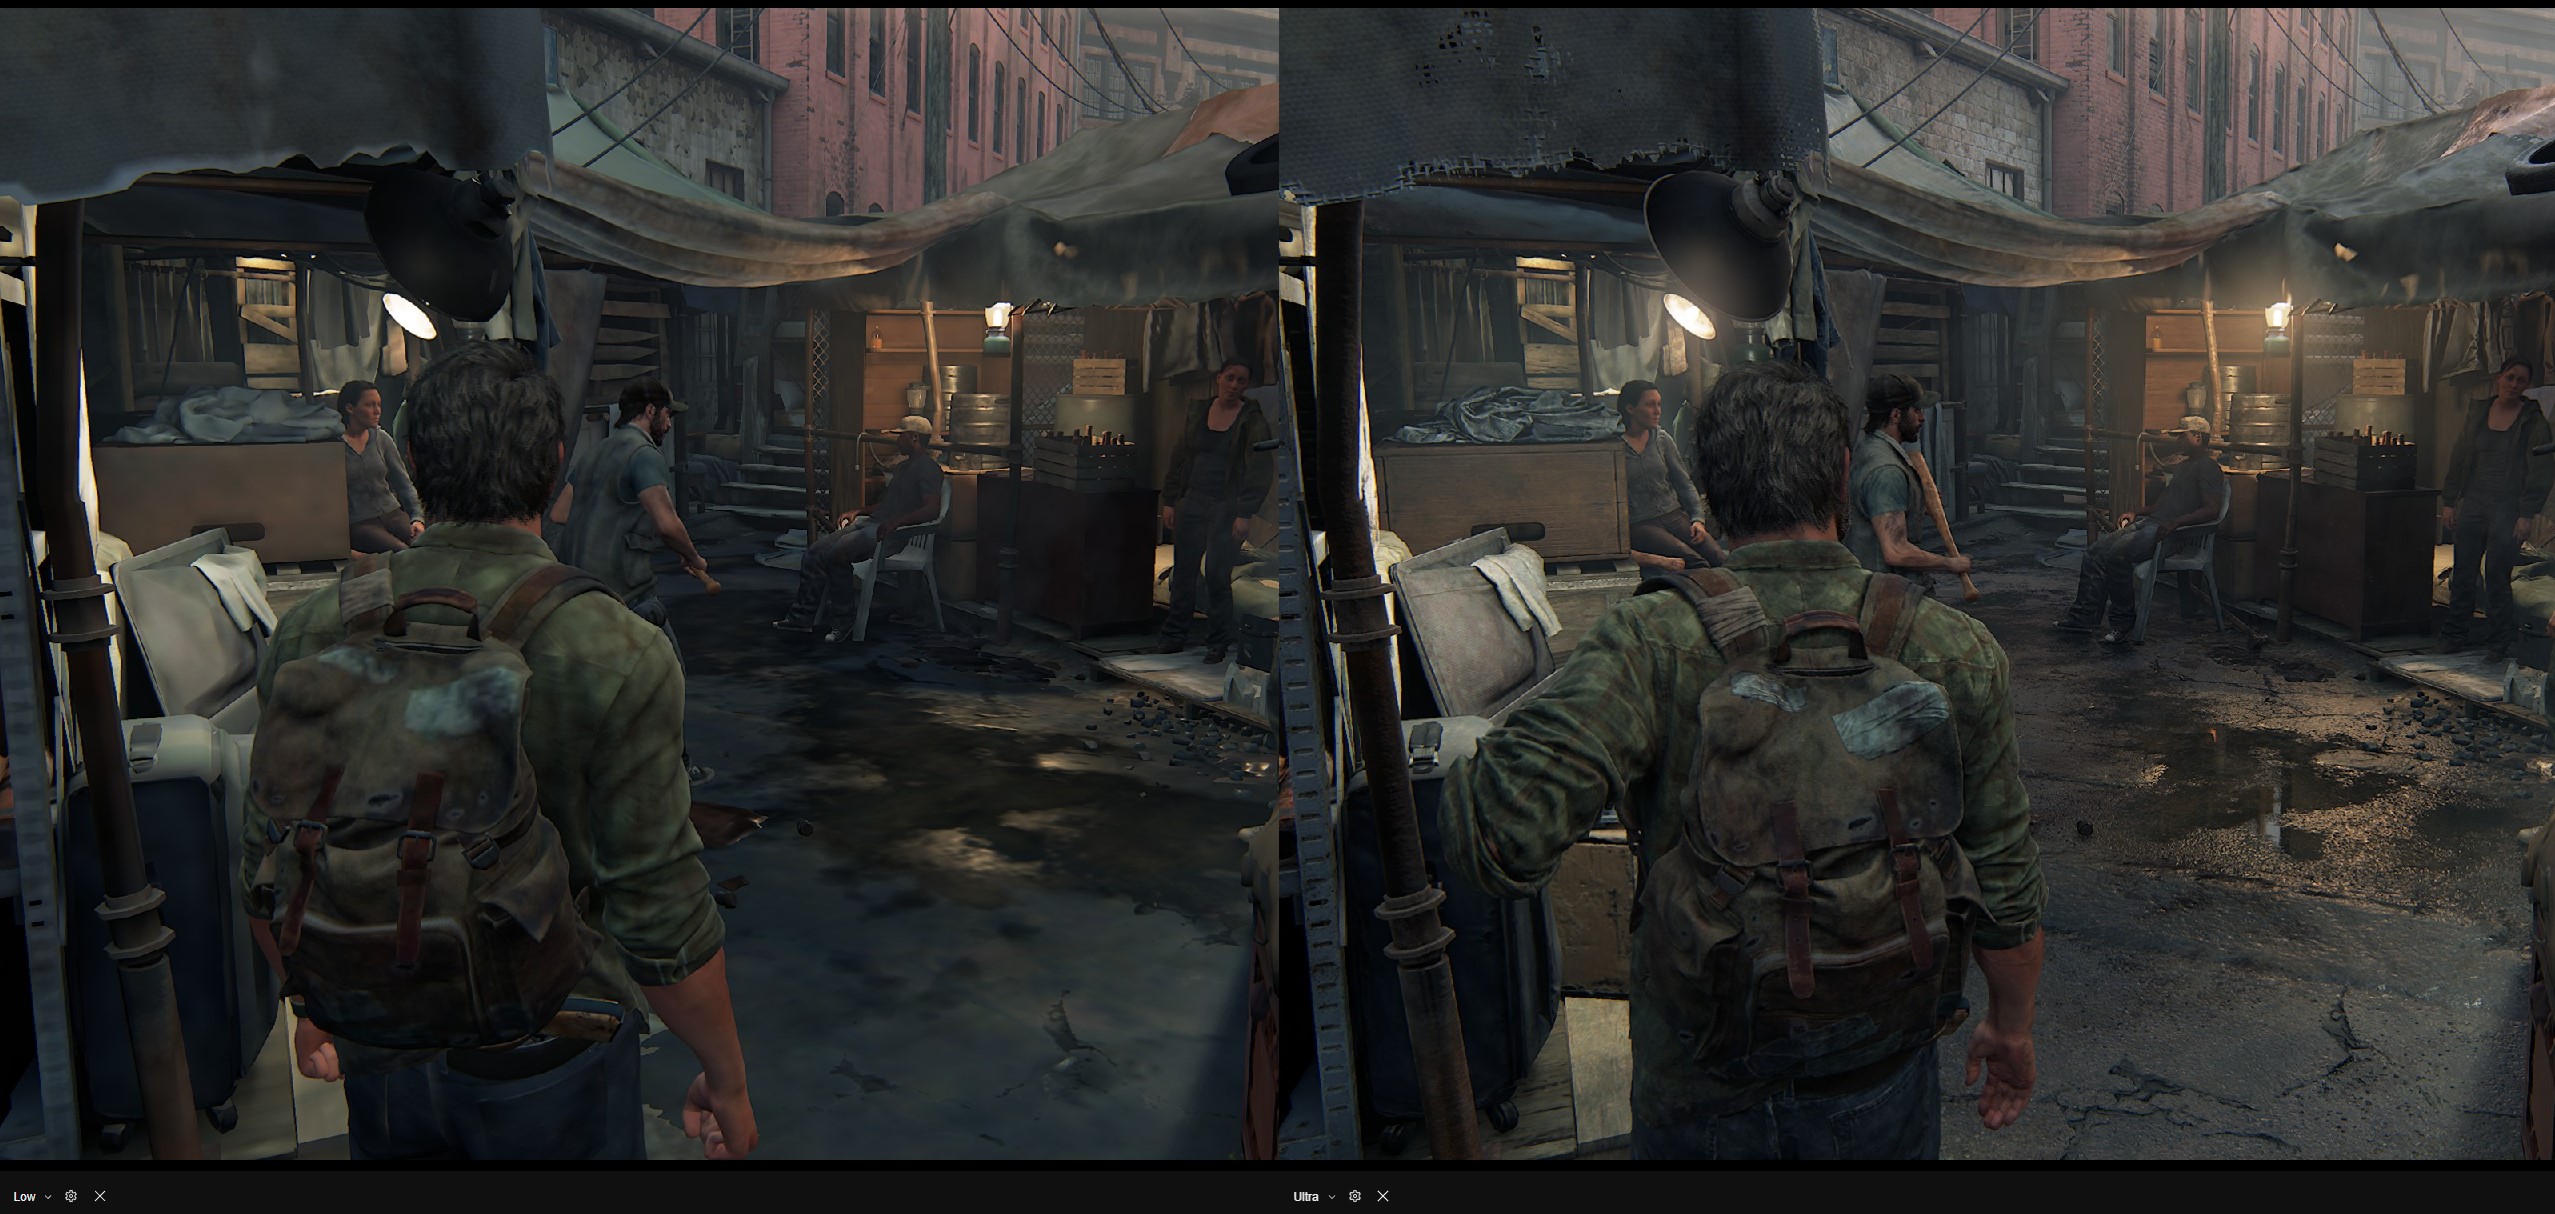 Why You Shouldn't Buy 'The Last of Us' on PC